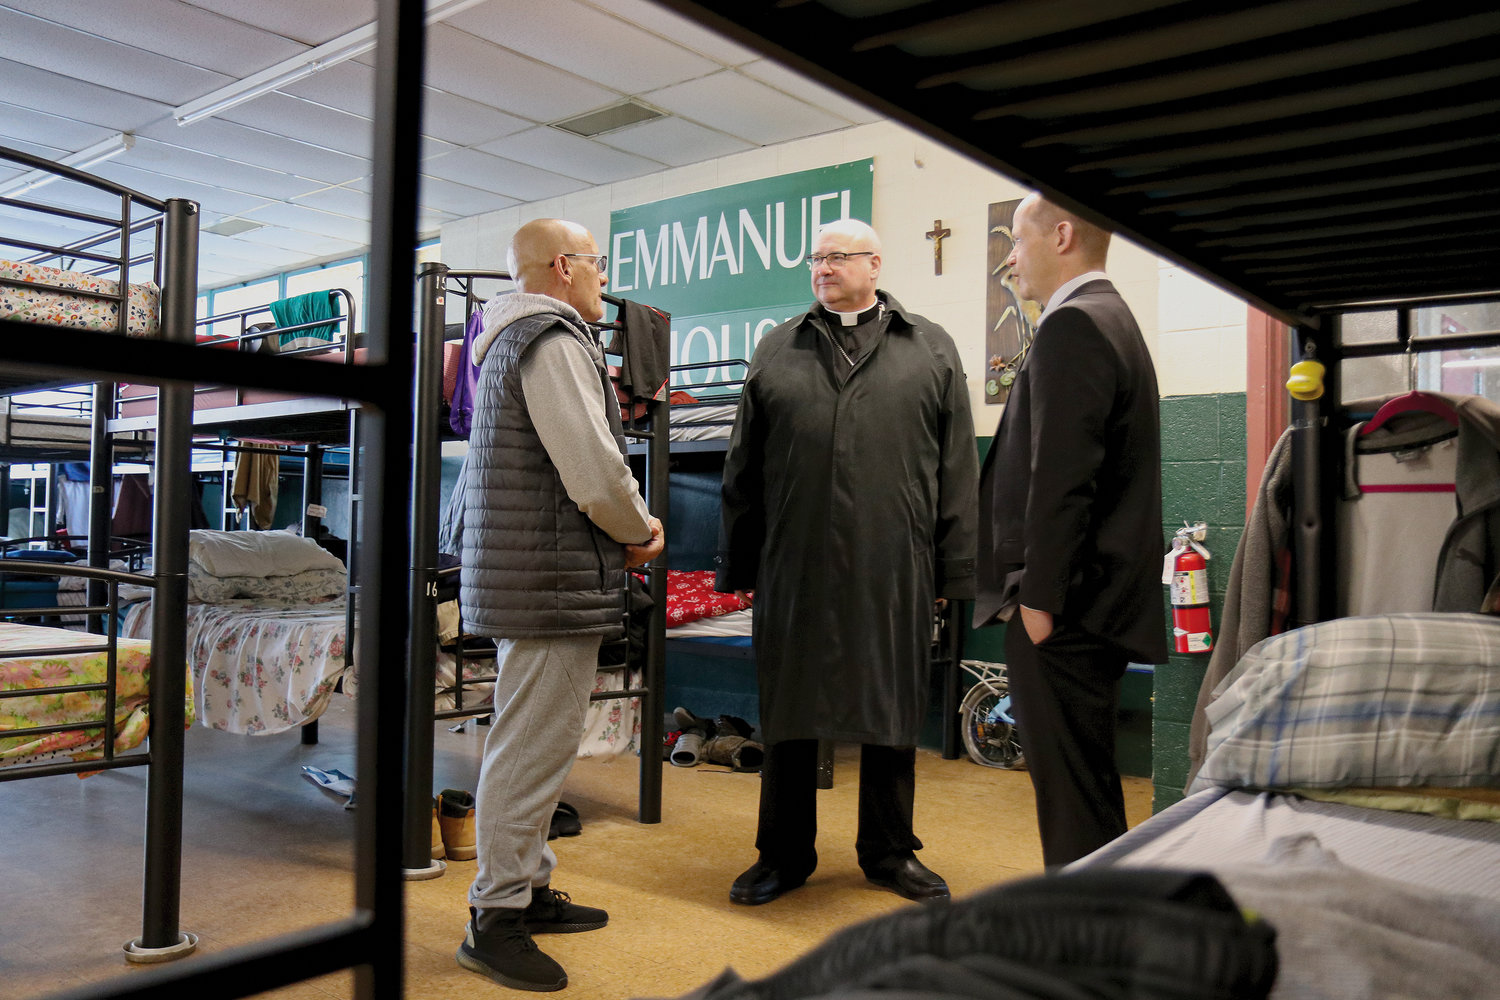 He also spoke with guests and staff of the Emmanuel House homeless shelter and took a tour of Our Lady of Providence Seminary. A Mass of Reception for Bishop Henning will take place on Jan. 26, 2023, at 2 p.m., at the Cathedral of SS. Peter and Paul.